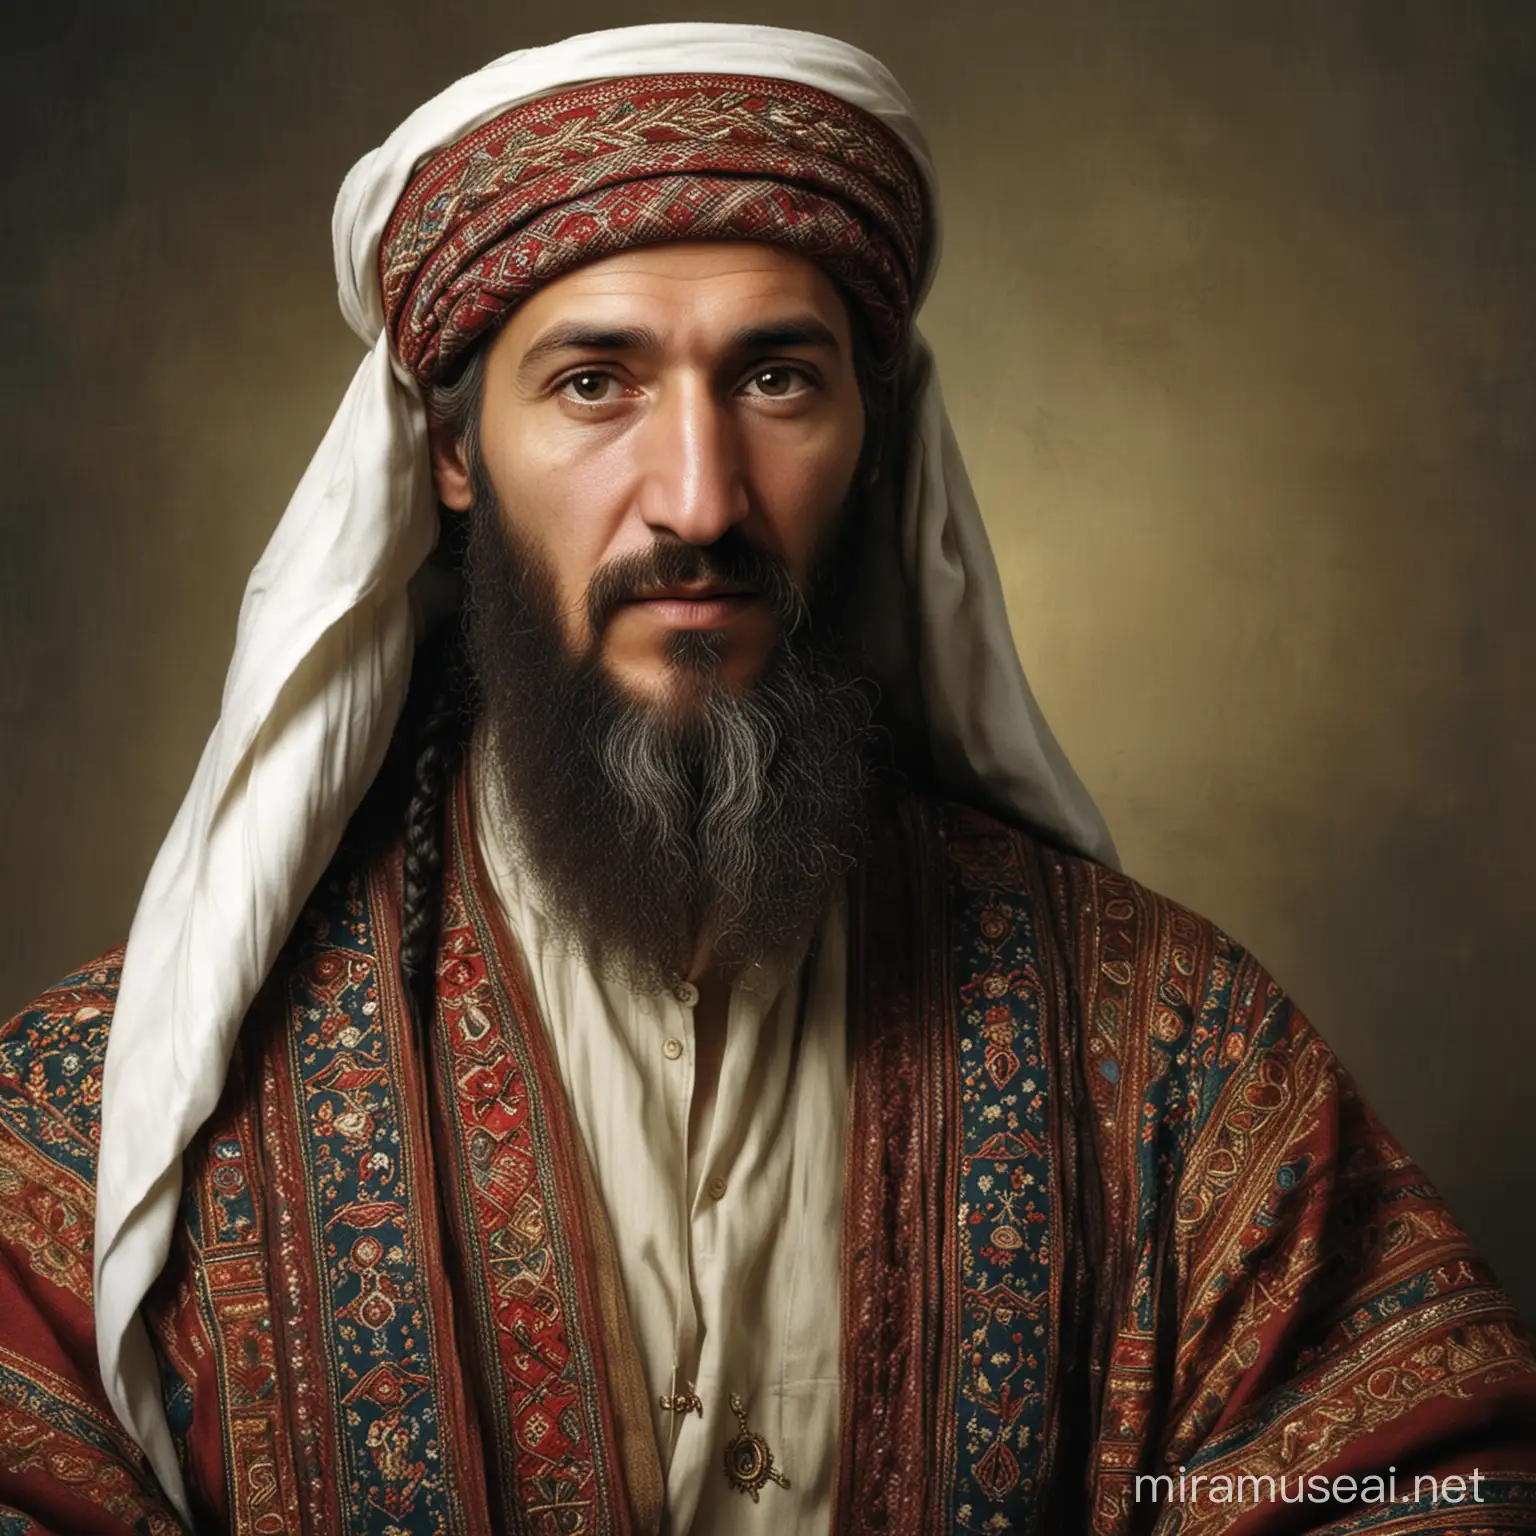 Classical Ukrainian Bin Laden with Traditional National Attributes